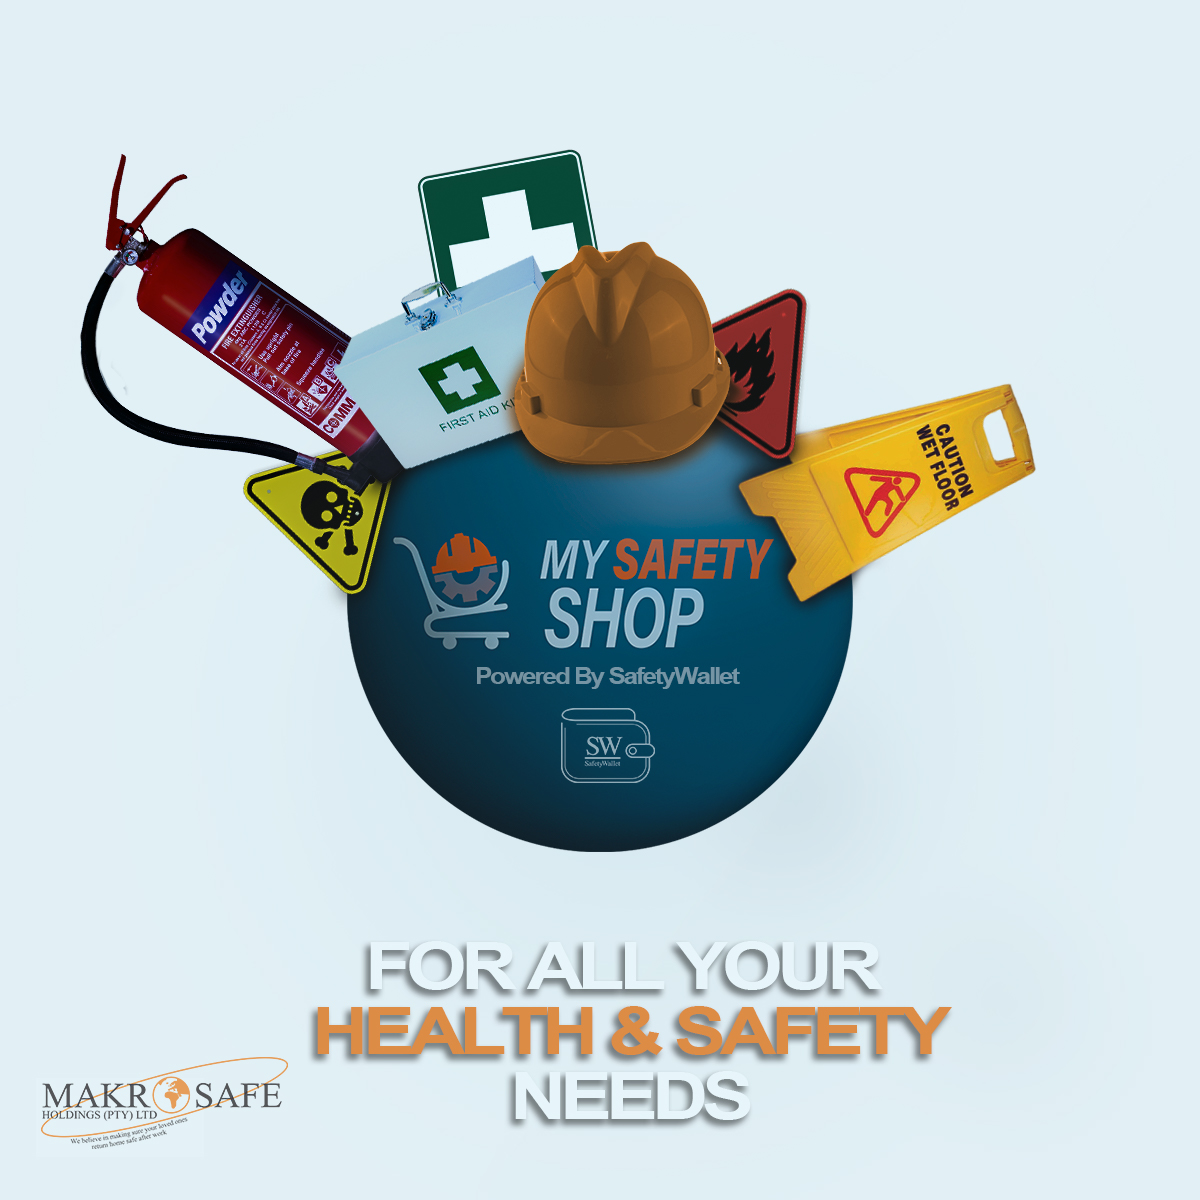 Visit mysafetyshop.co.za for your Health and safety products and services.
#Fireequipment 
#Fireservices
#Firstaidproducts
#Firstaidtraining
#OHSTraining
#Riskassessment
#Legalcomplianceaudit